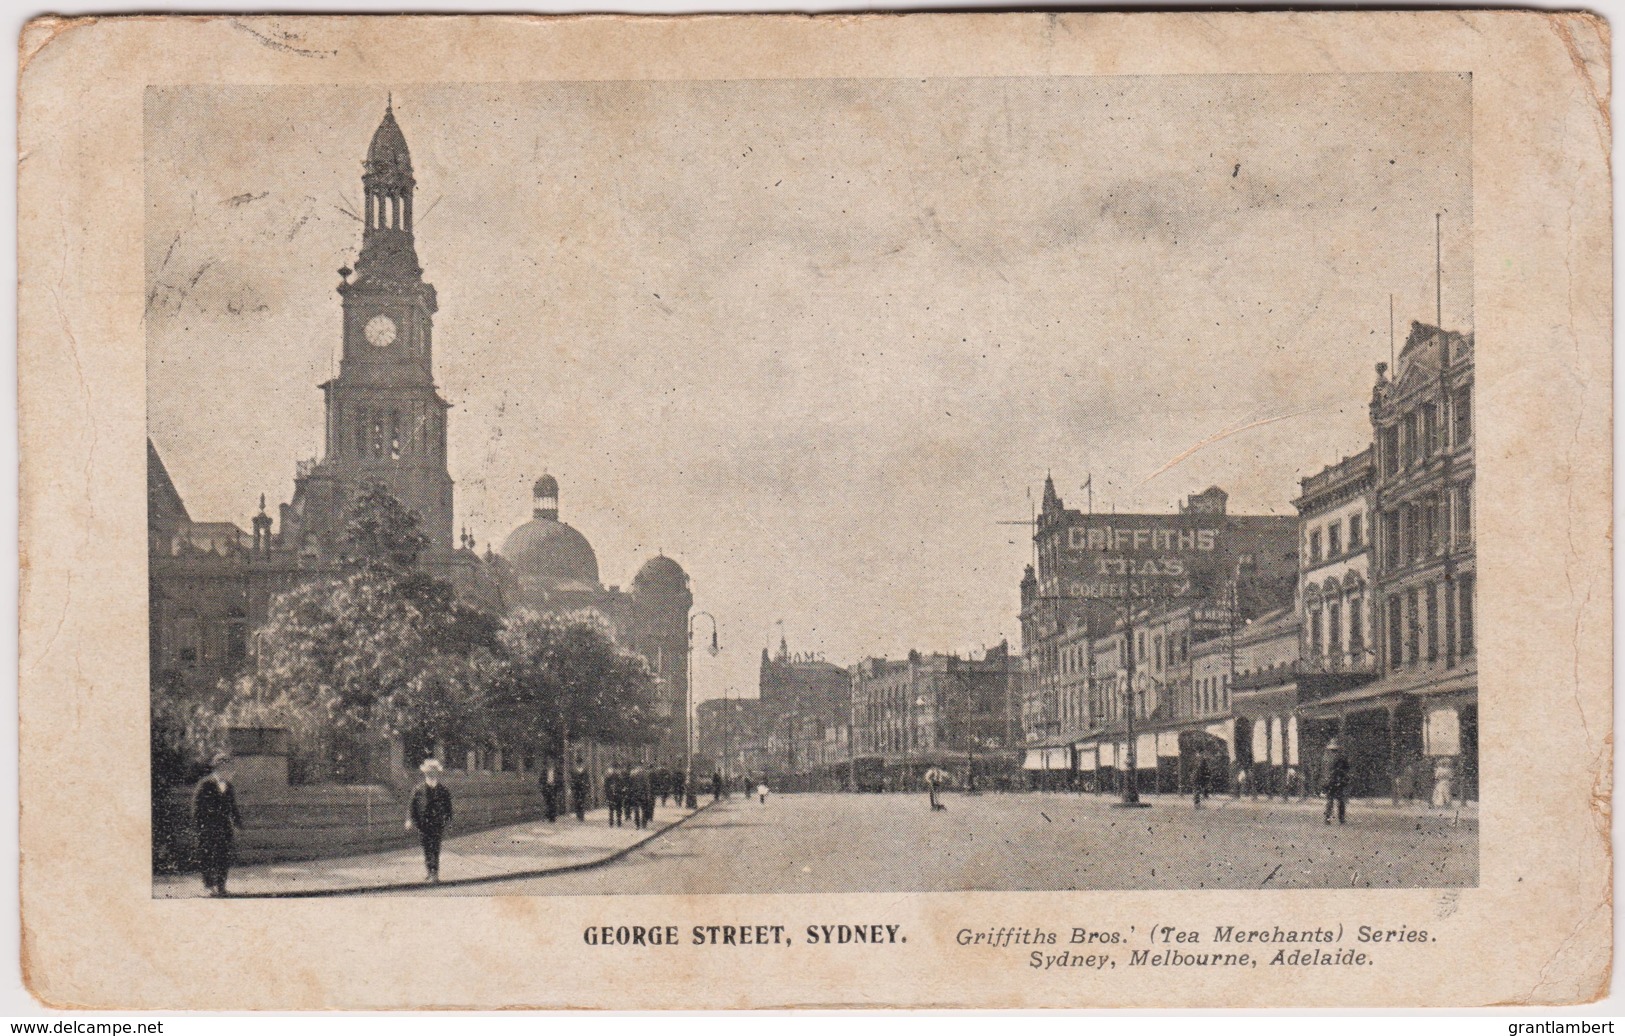 George Street, Sydney, New South Wales Advice Card, Posted 1906 From Bowral, NSW With Stamp - Sydney